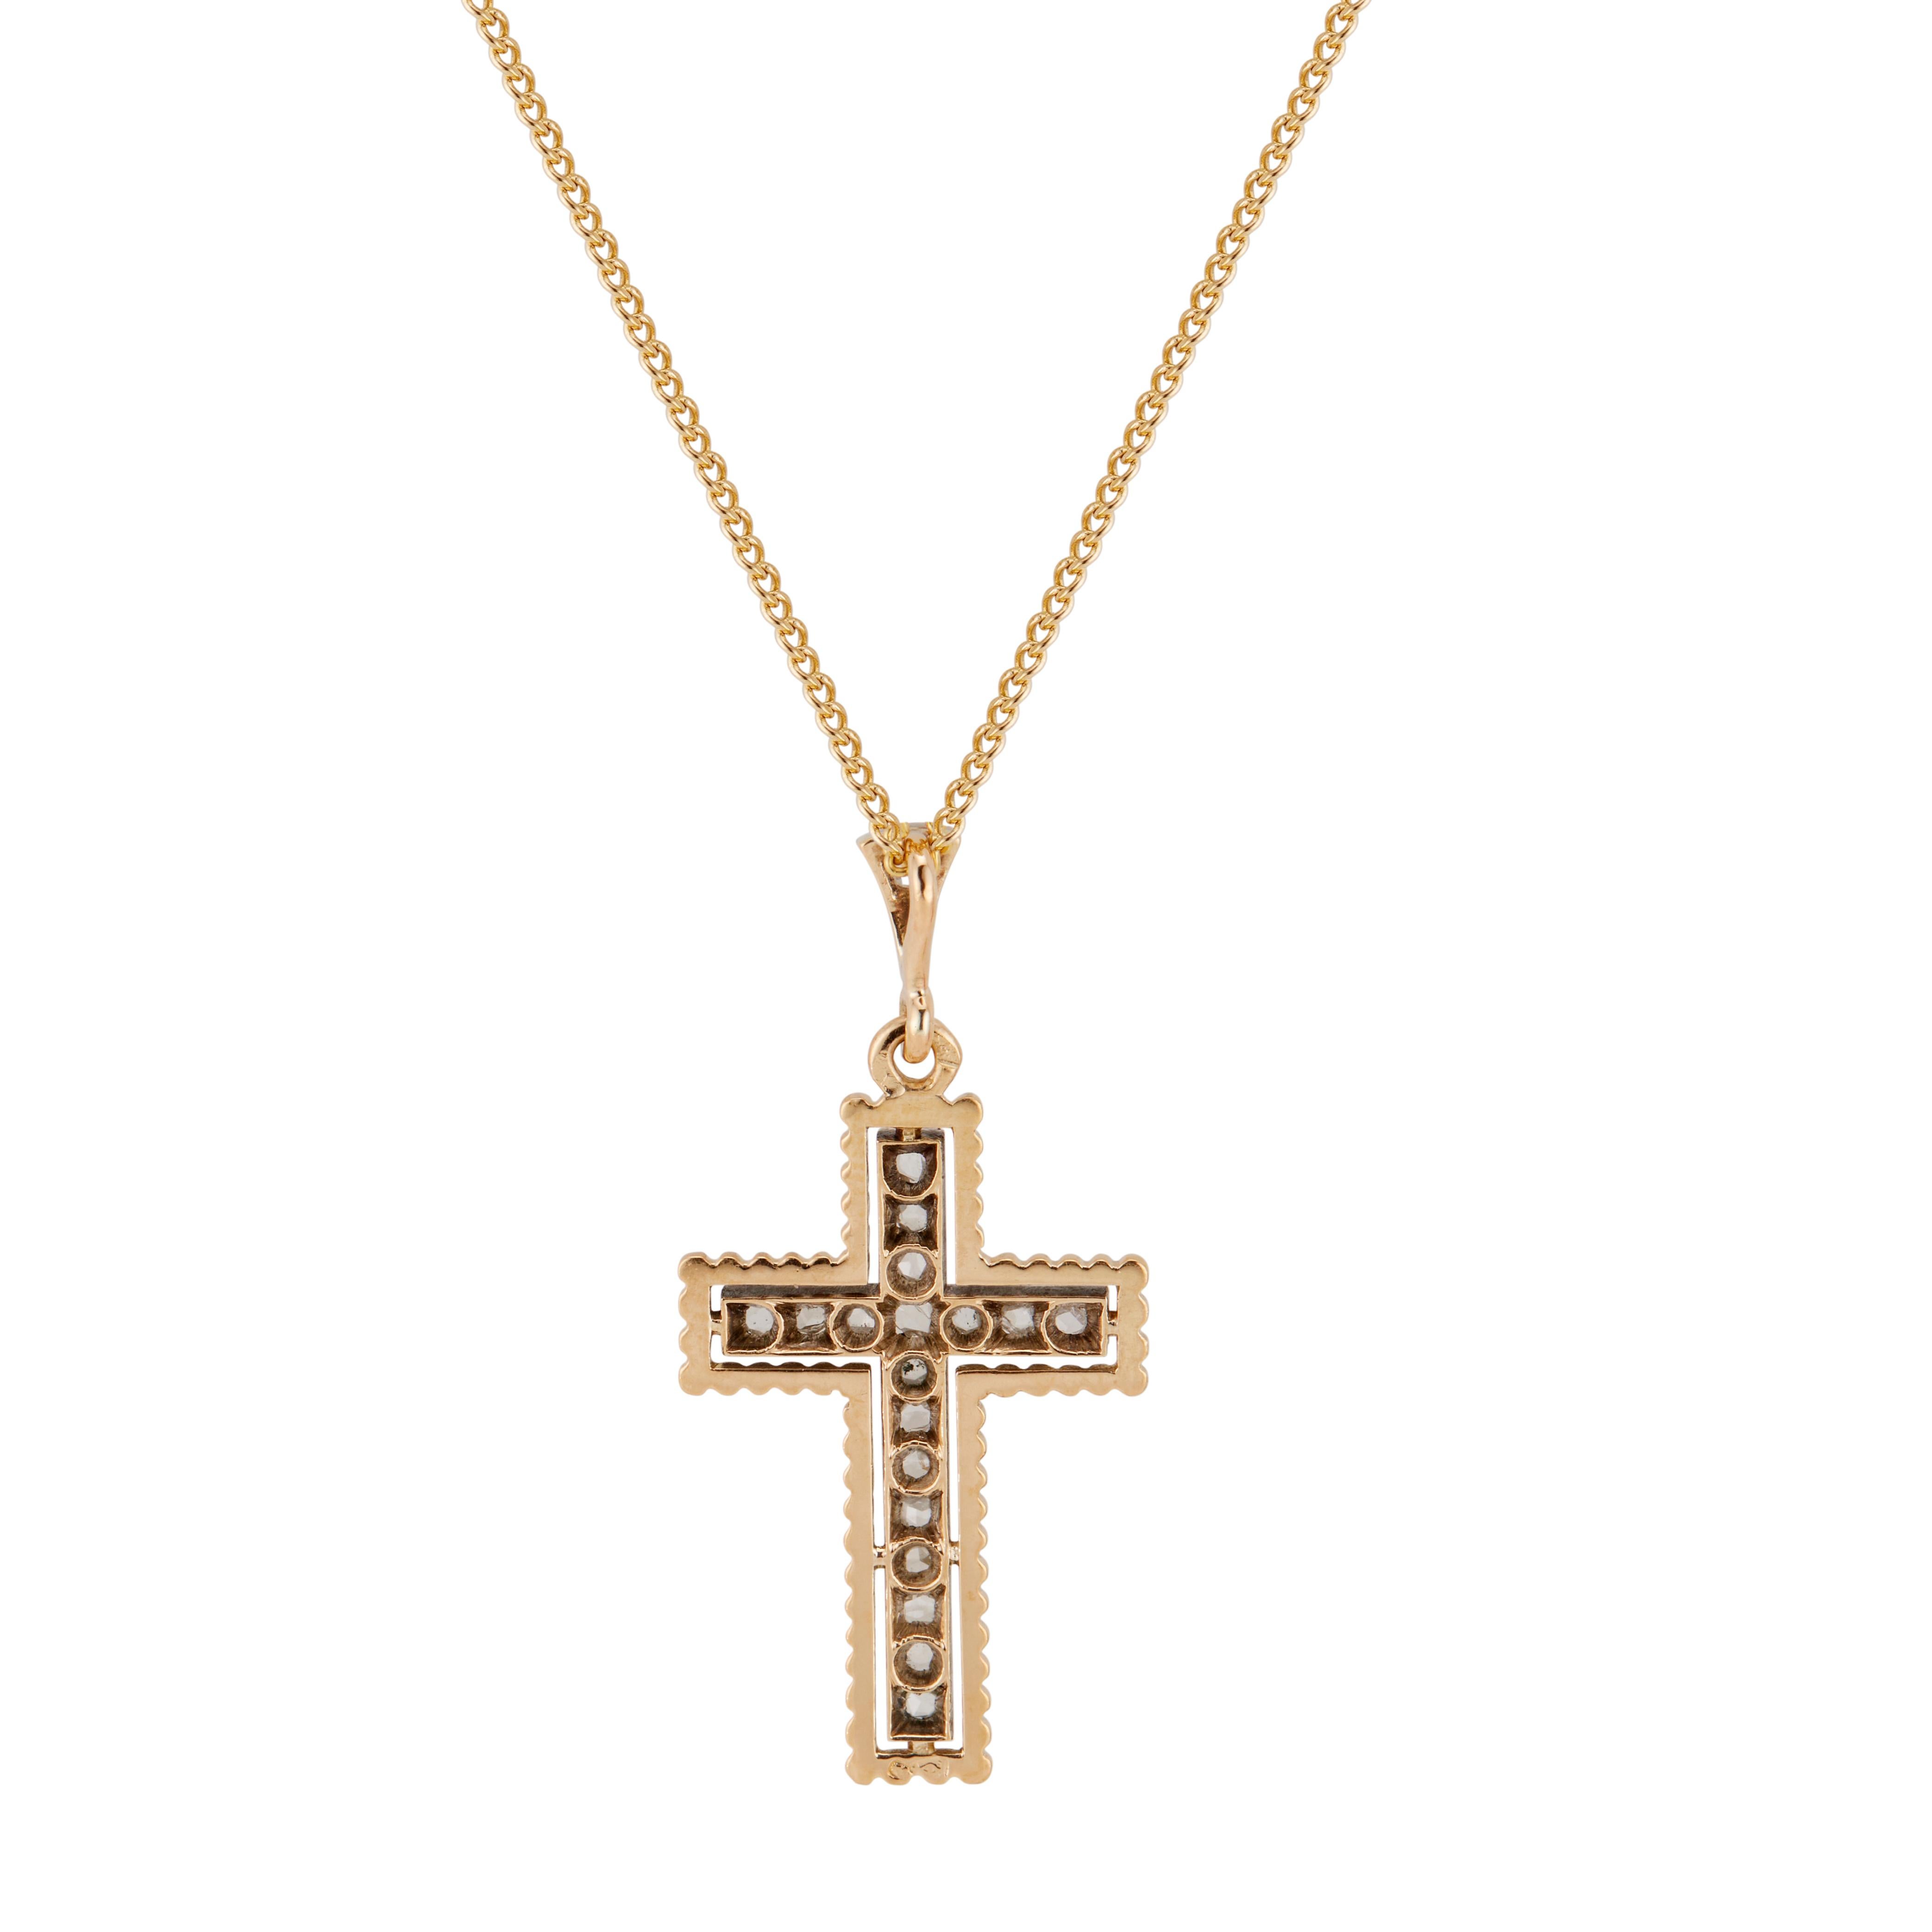 Estate 1920's diamond cross pendant necklace. 19 rose cut diamonds set in silver. The cross and chain are in 18k yellow gold. 16 inch chain. 

19 rose cut diamonds, G-H SI approx. .25cts
18k yellow gold 
Silver 
5.2 grams
Top to bottom: 36mm or 1.4